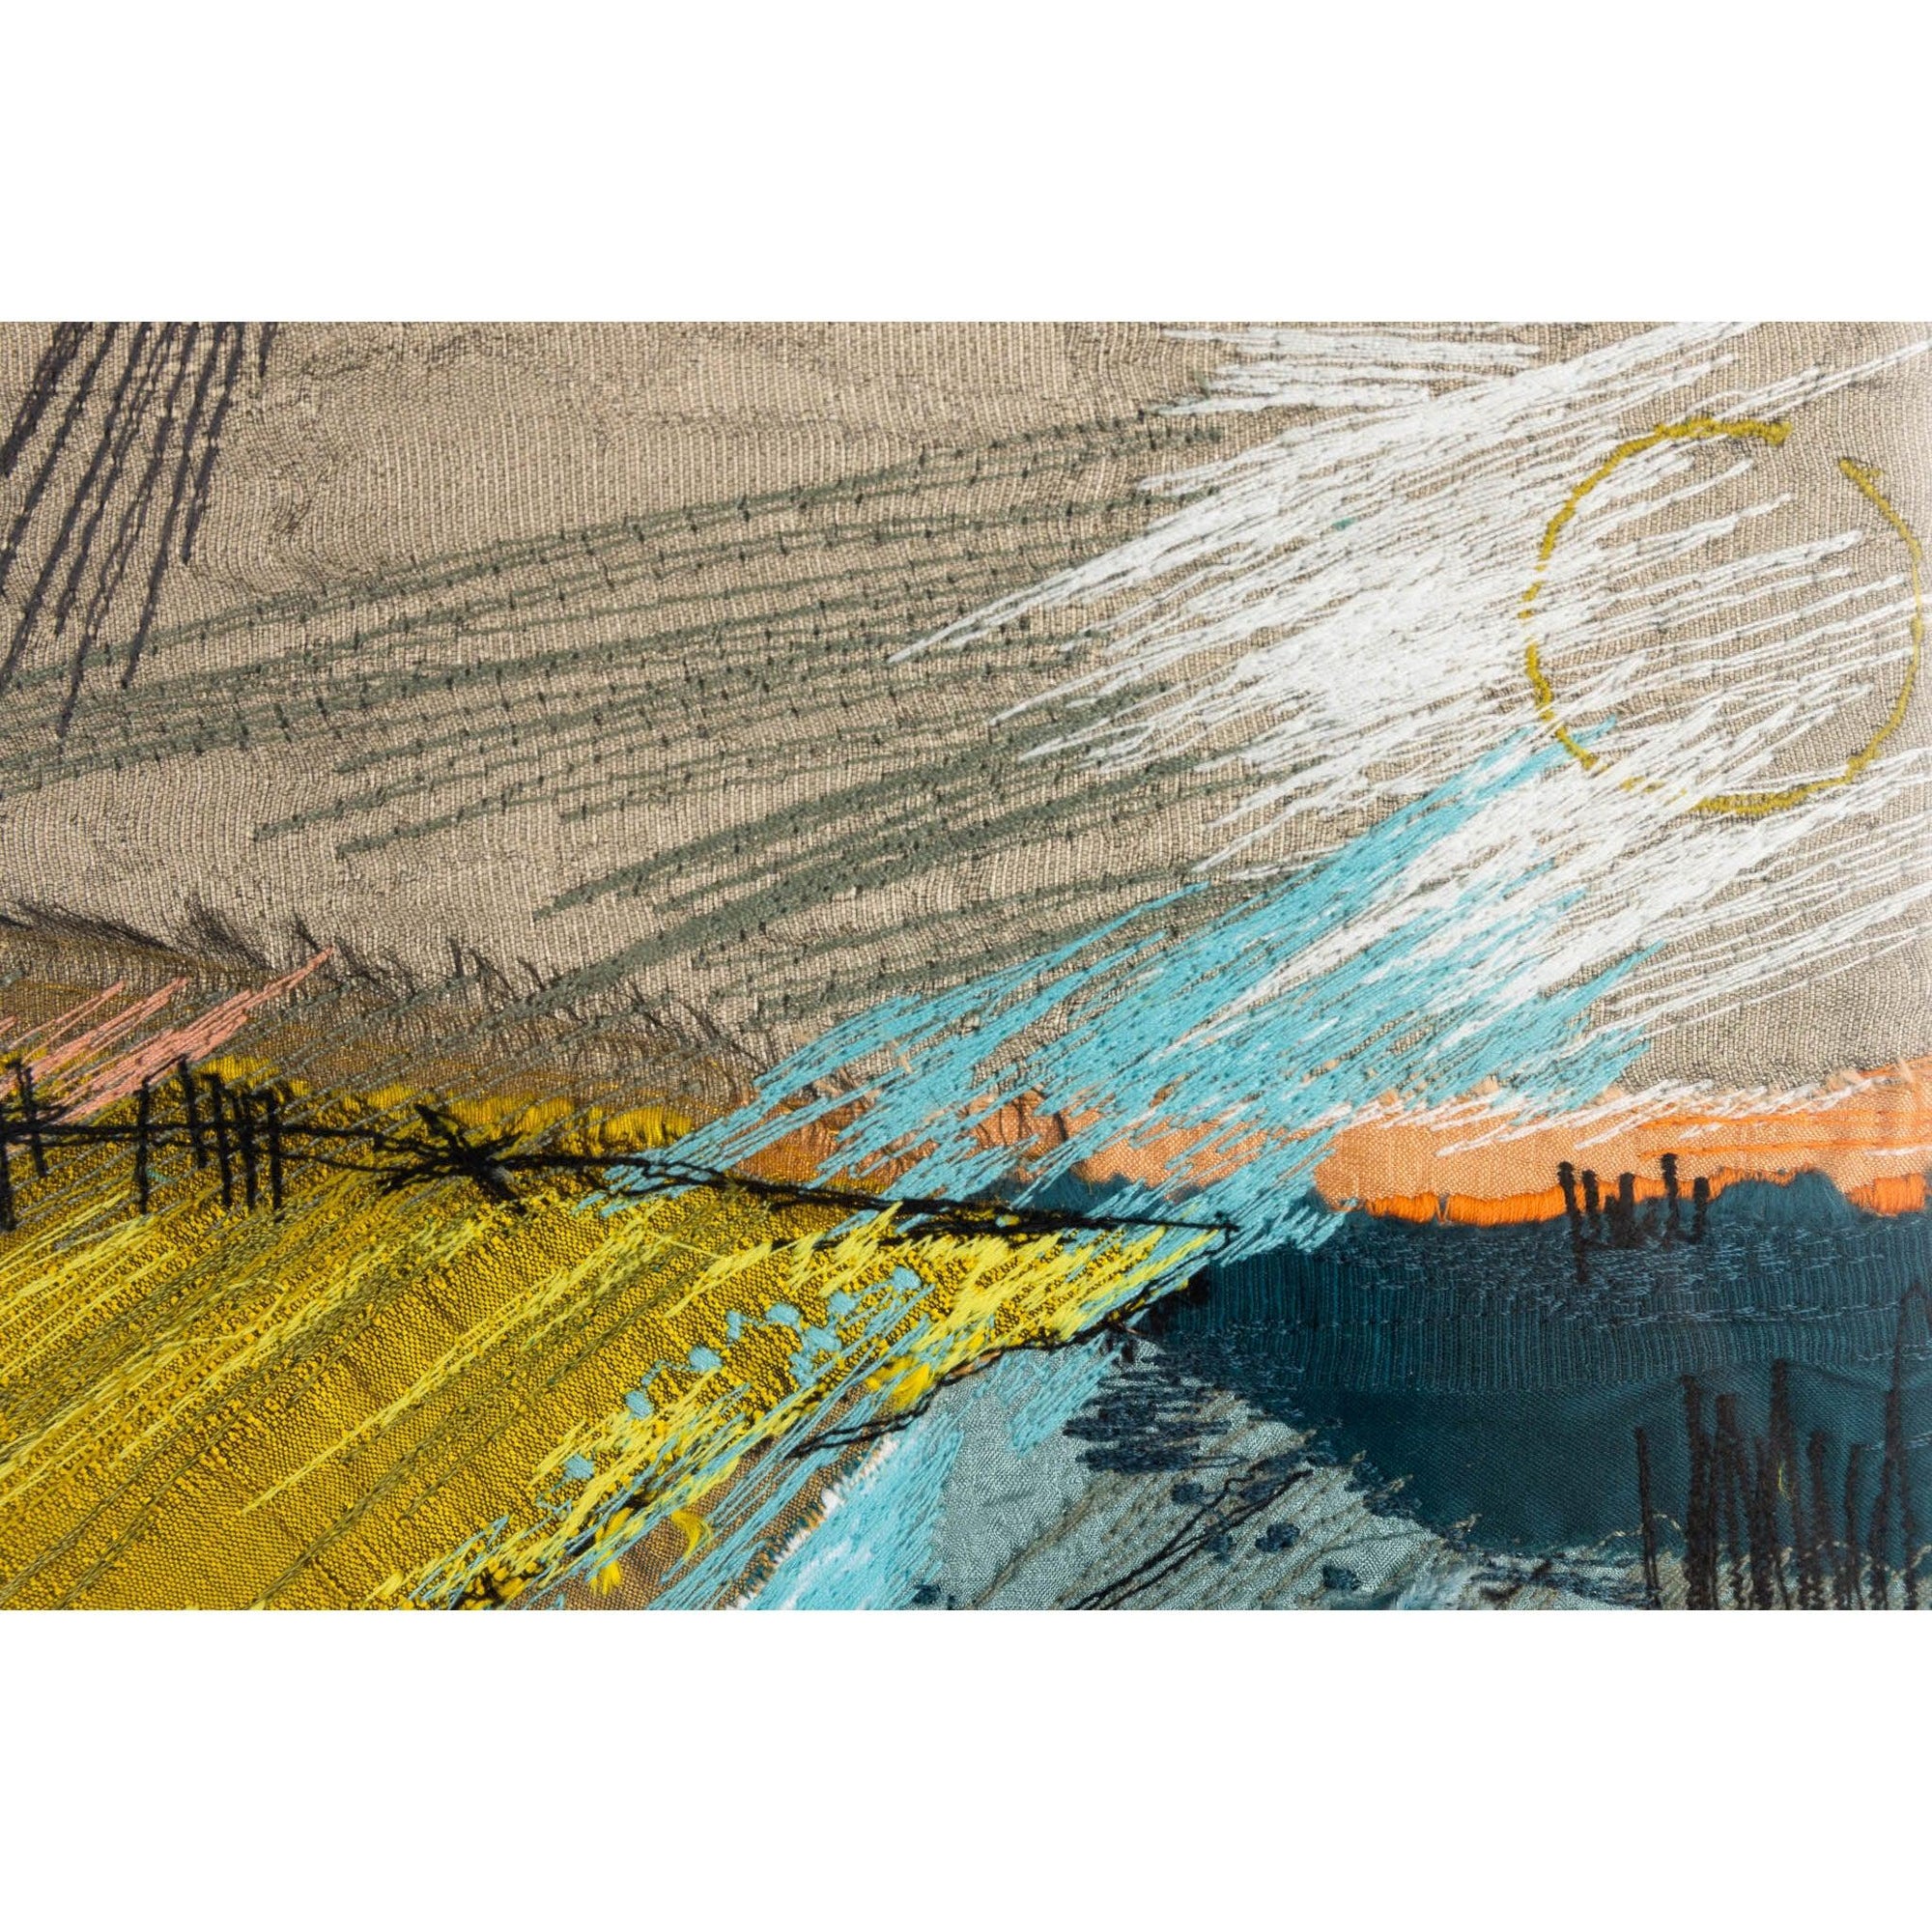 'Harvest' dynamic stitched textiles by Sarah Pooley, available at Padstow Gallery, Cornwall